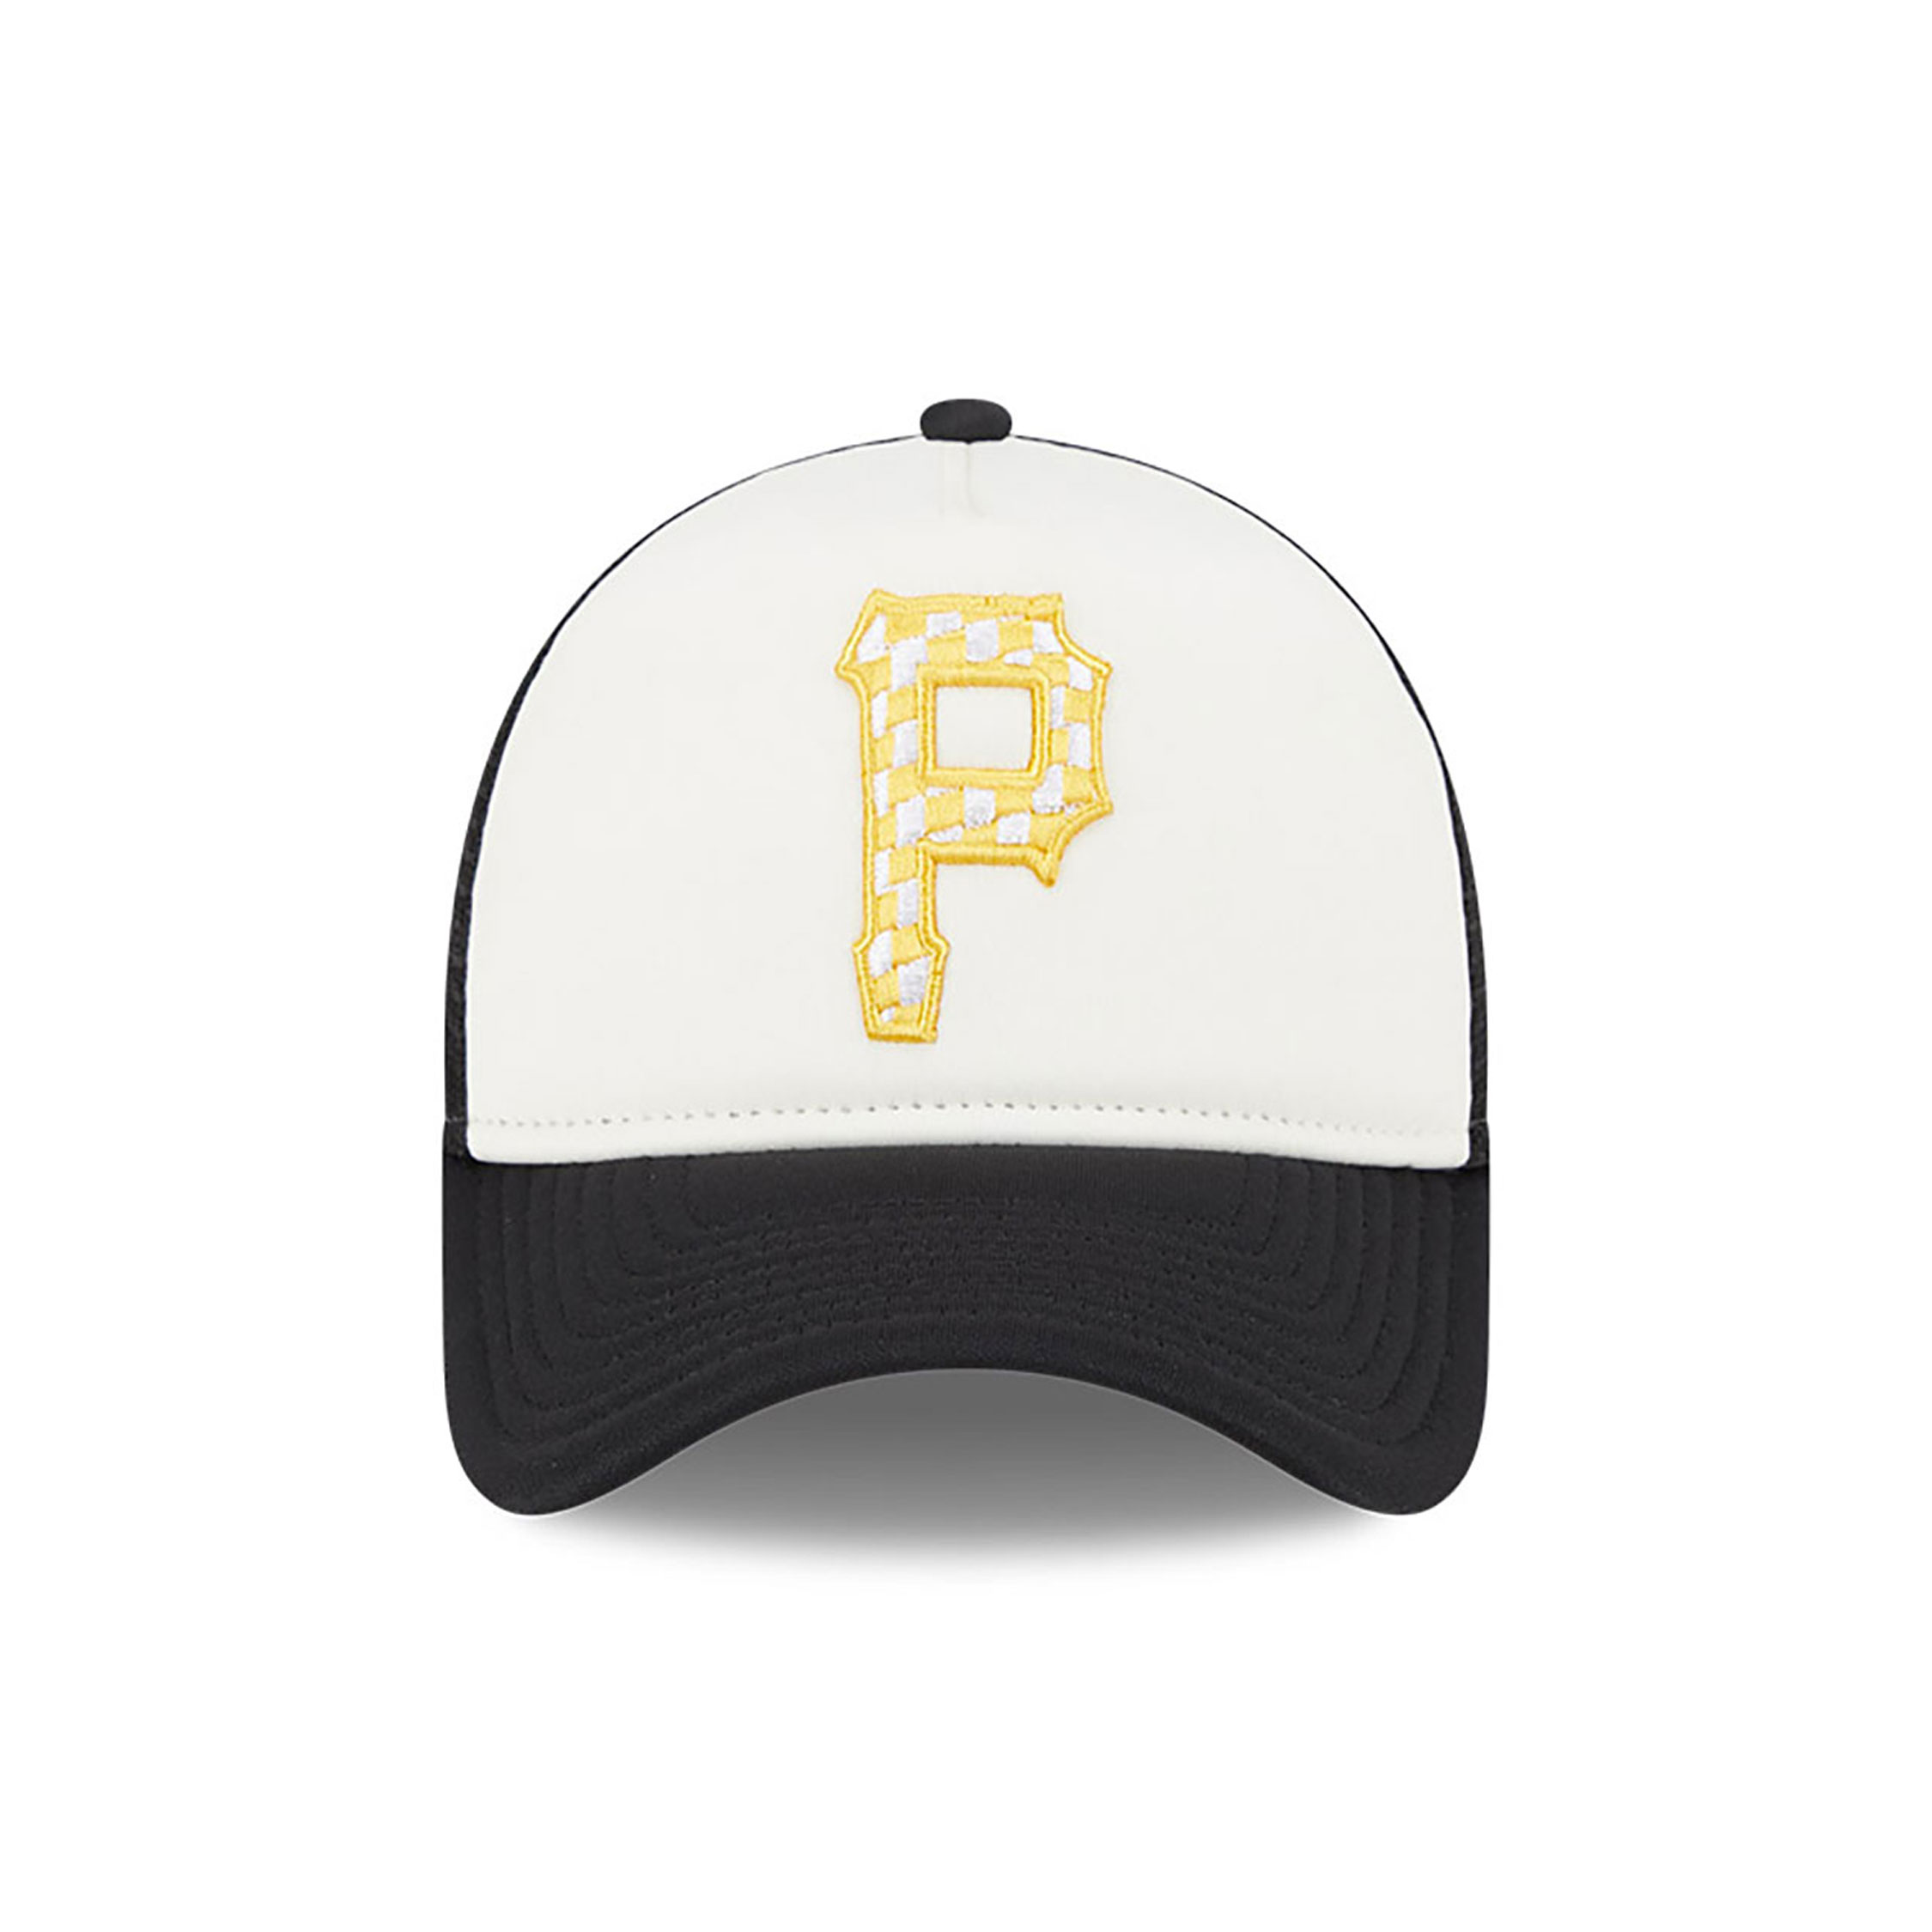 Pittsburgh Pirates Check Flag Black 9FORTY A-Frame Adjustable Trucker Cap